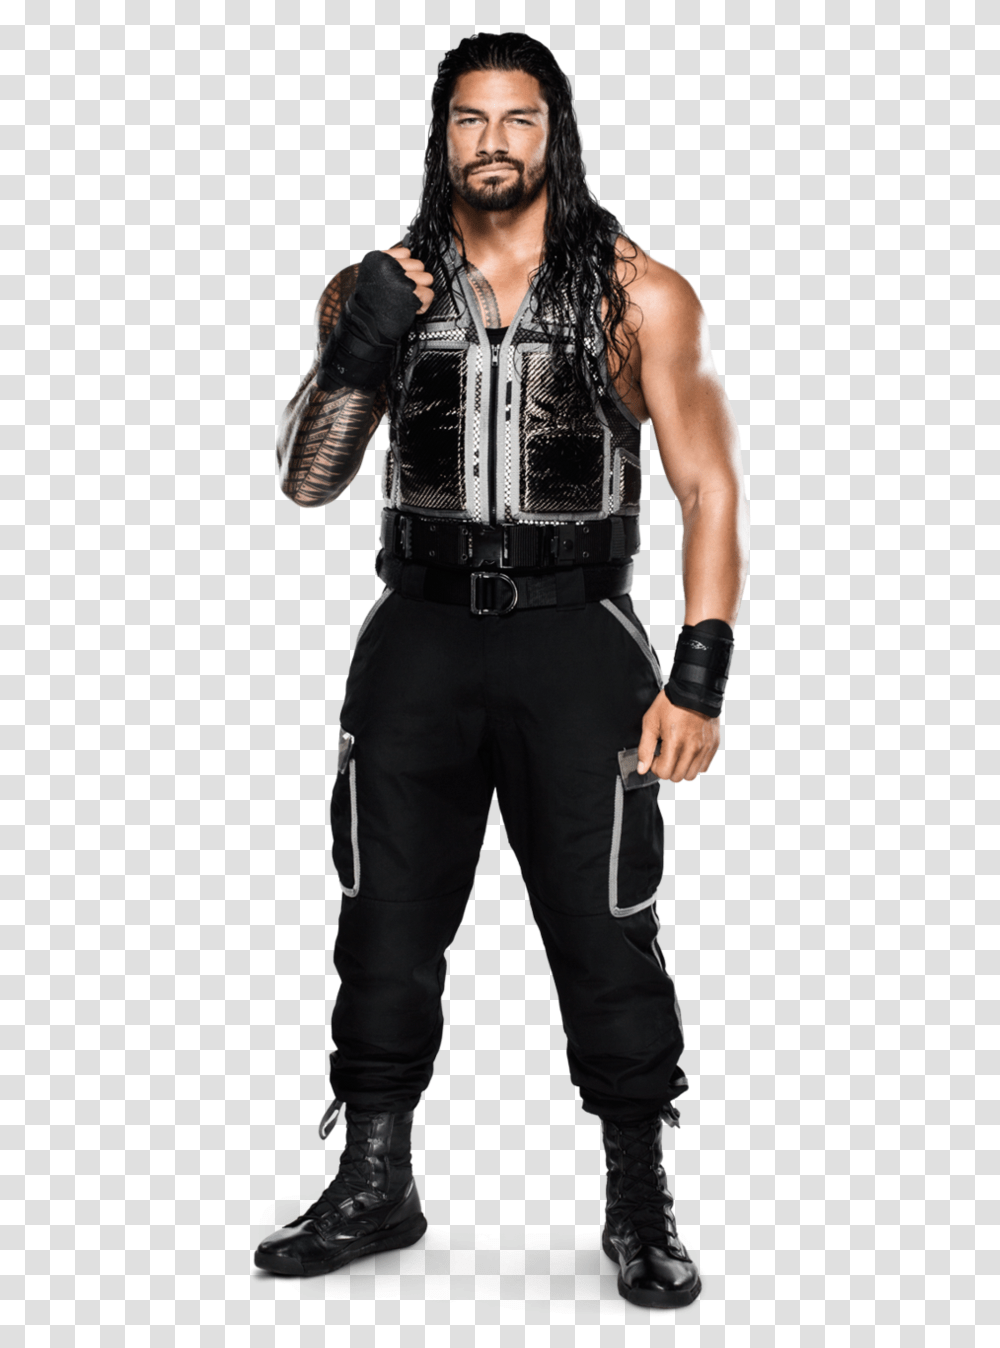 Jon Amp Trademark Cena You Cant See Me Amazoncom Roman Reigns Universal Championship, Person, Helmet, People Transparent Png